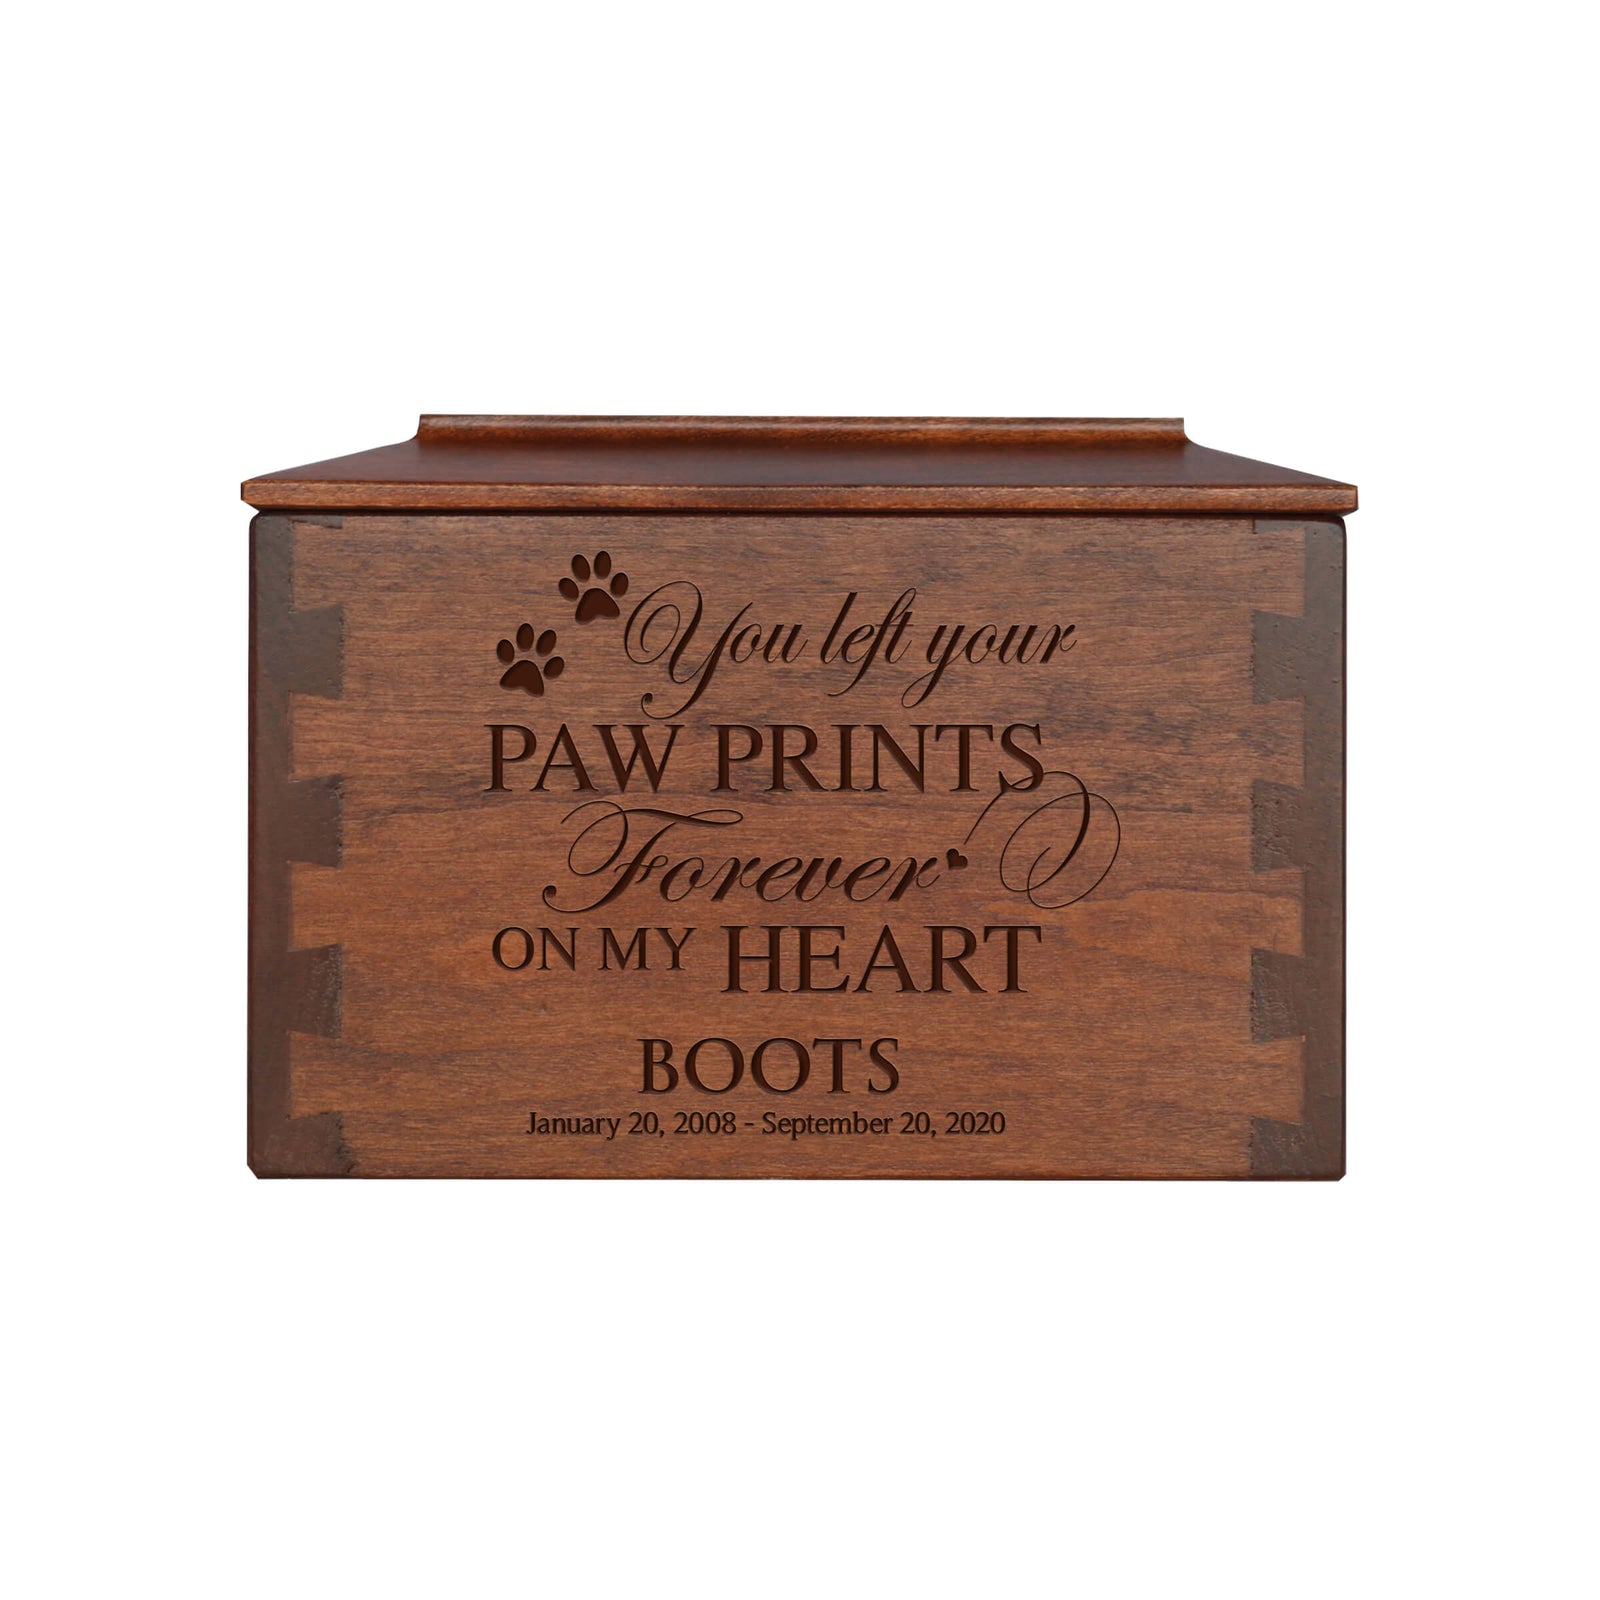 Pet Memorial Dovetail Cremation Urn Box for Dog or Cat - You Left Your Paw Prints